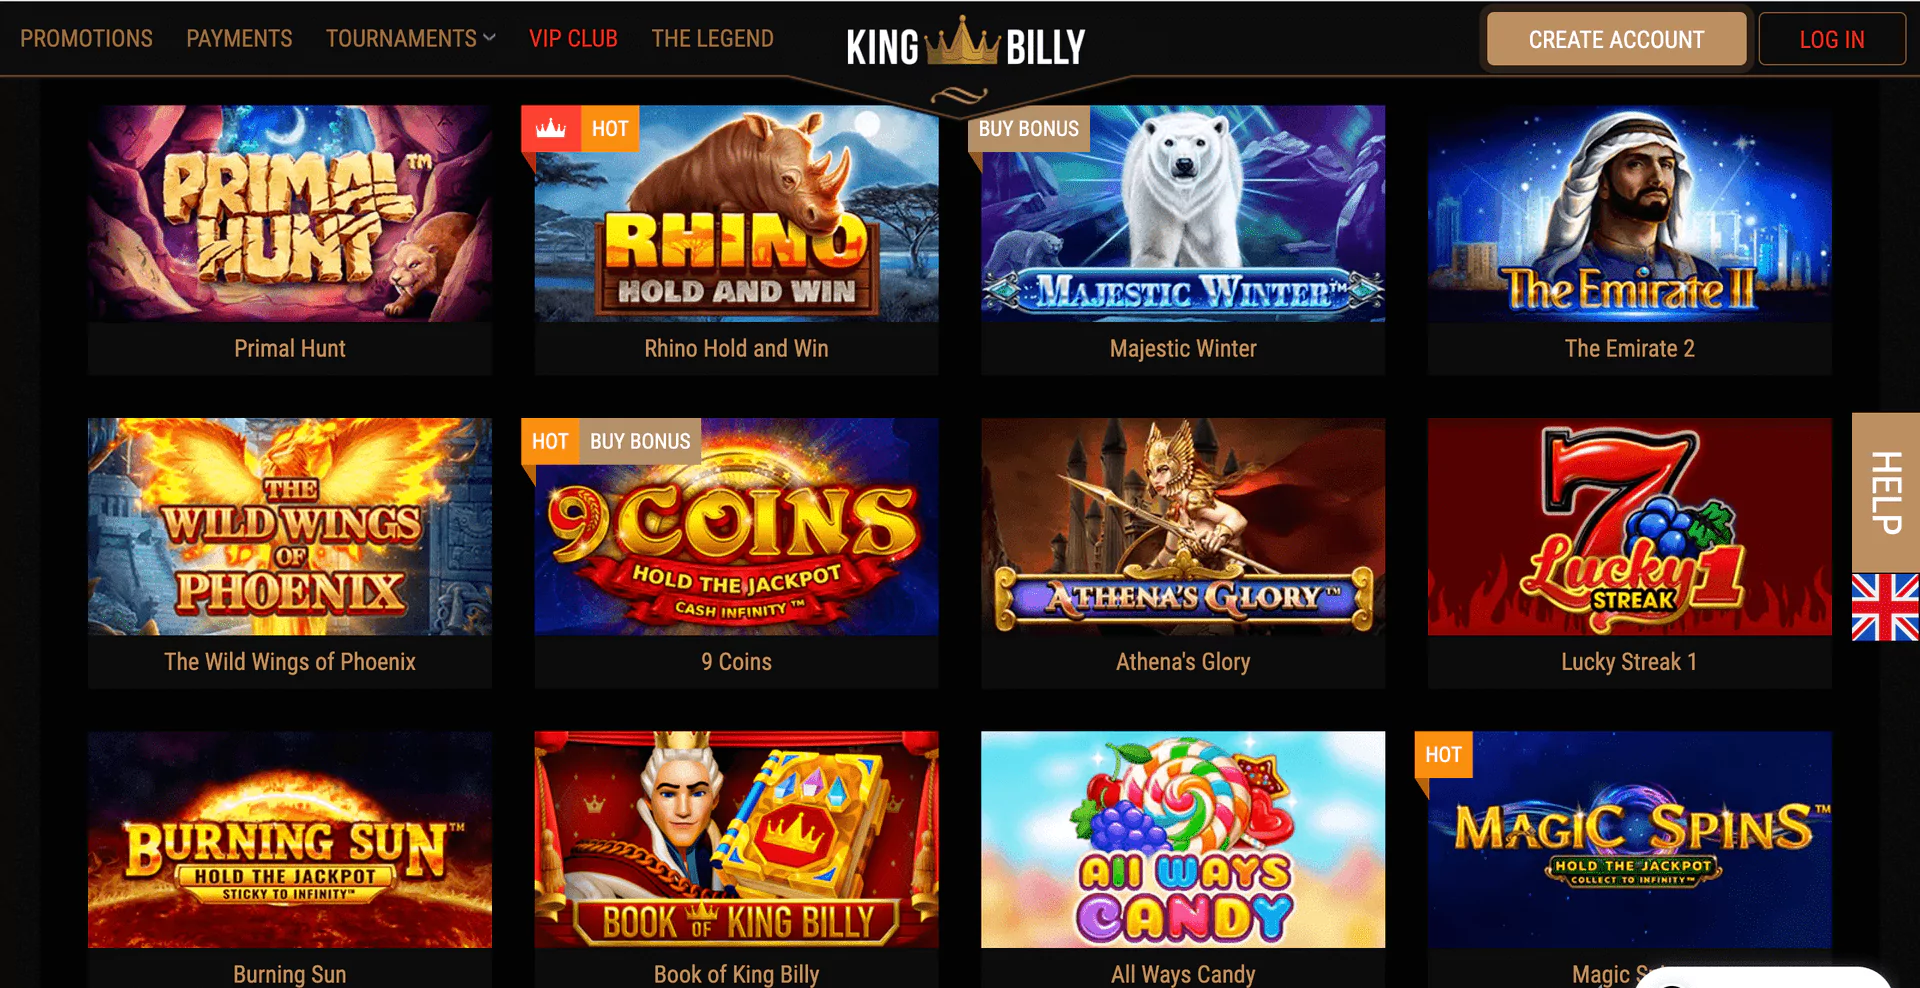 Games King Billy's